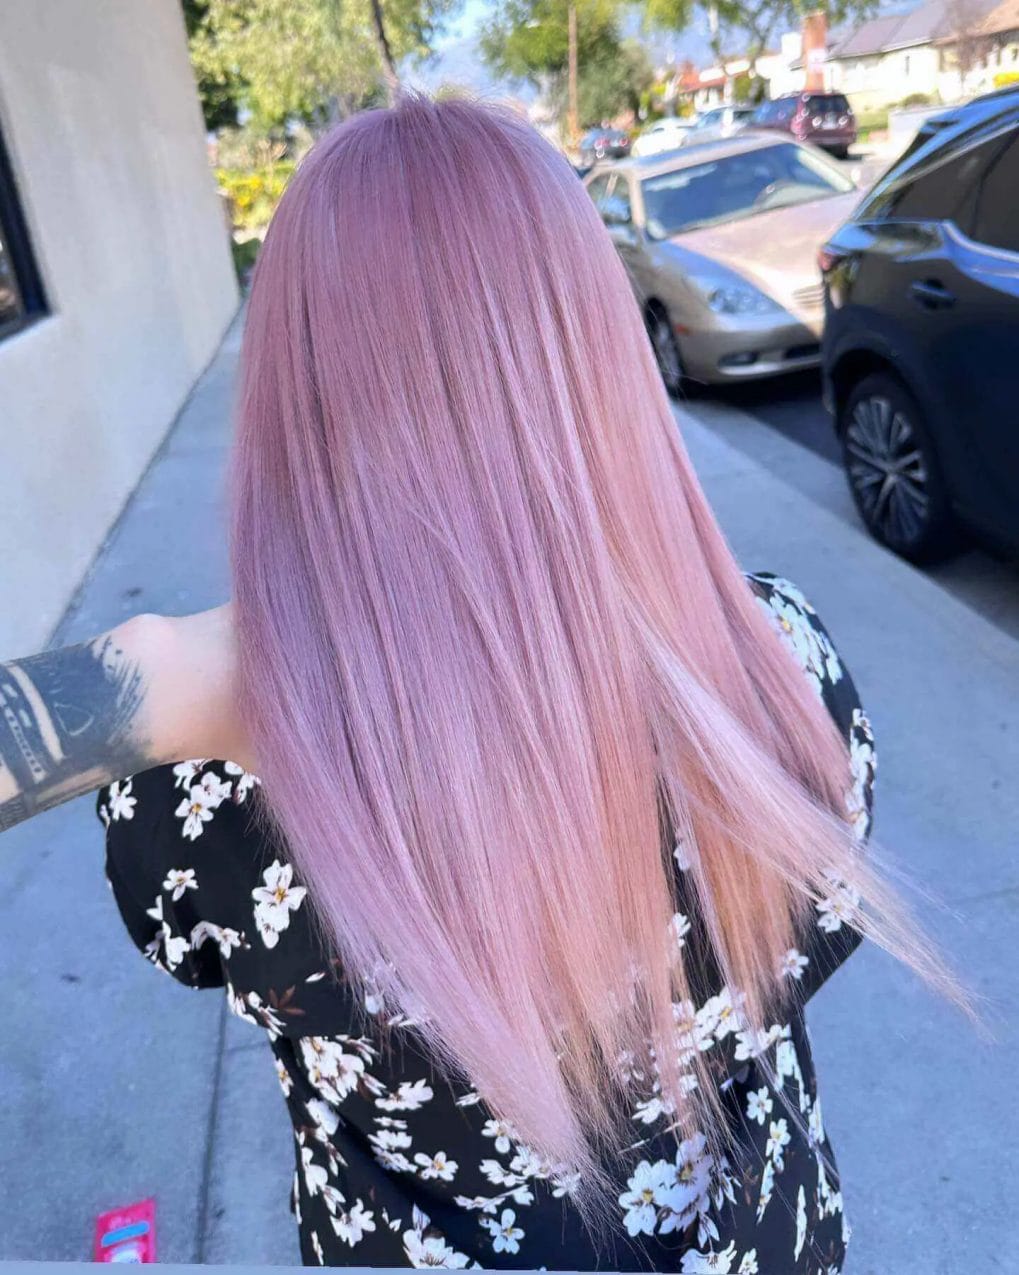 Long straight hair with playful pastel pink balayage from darker roots.